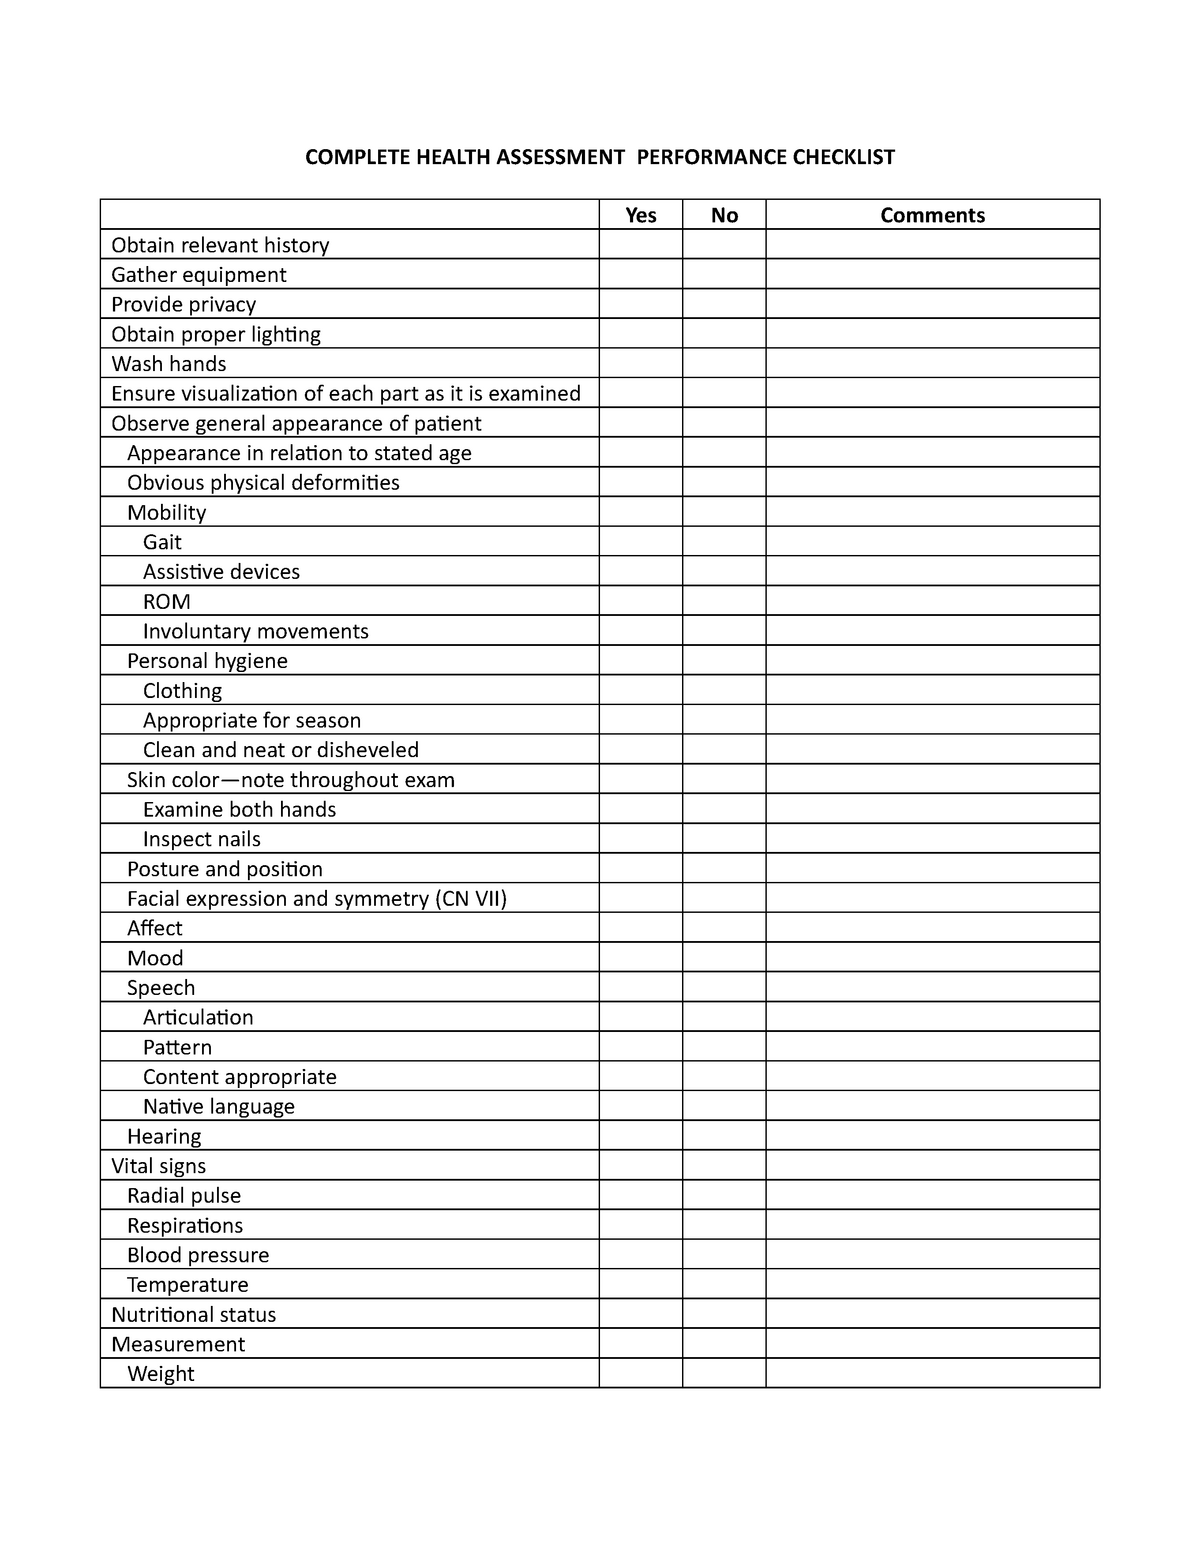 complete-health-assessment-checklist-complete-health-assessment